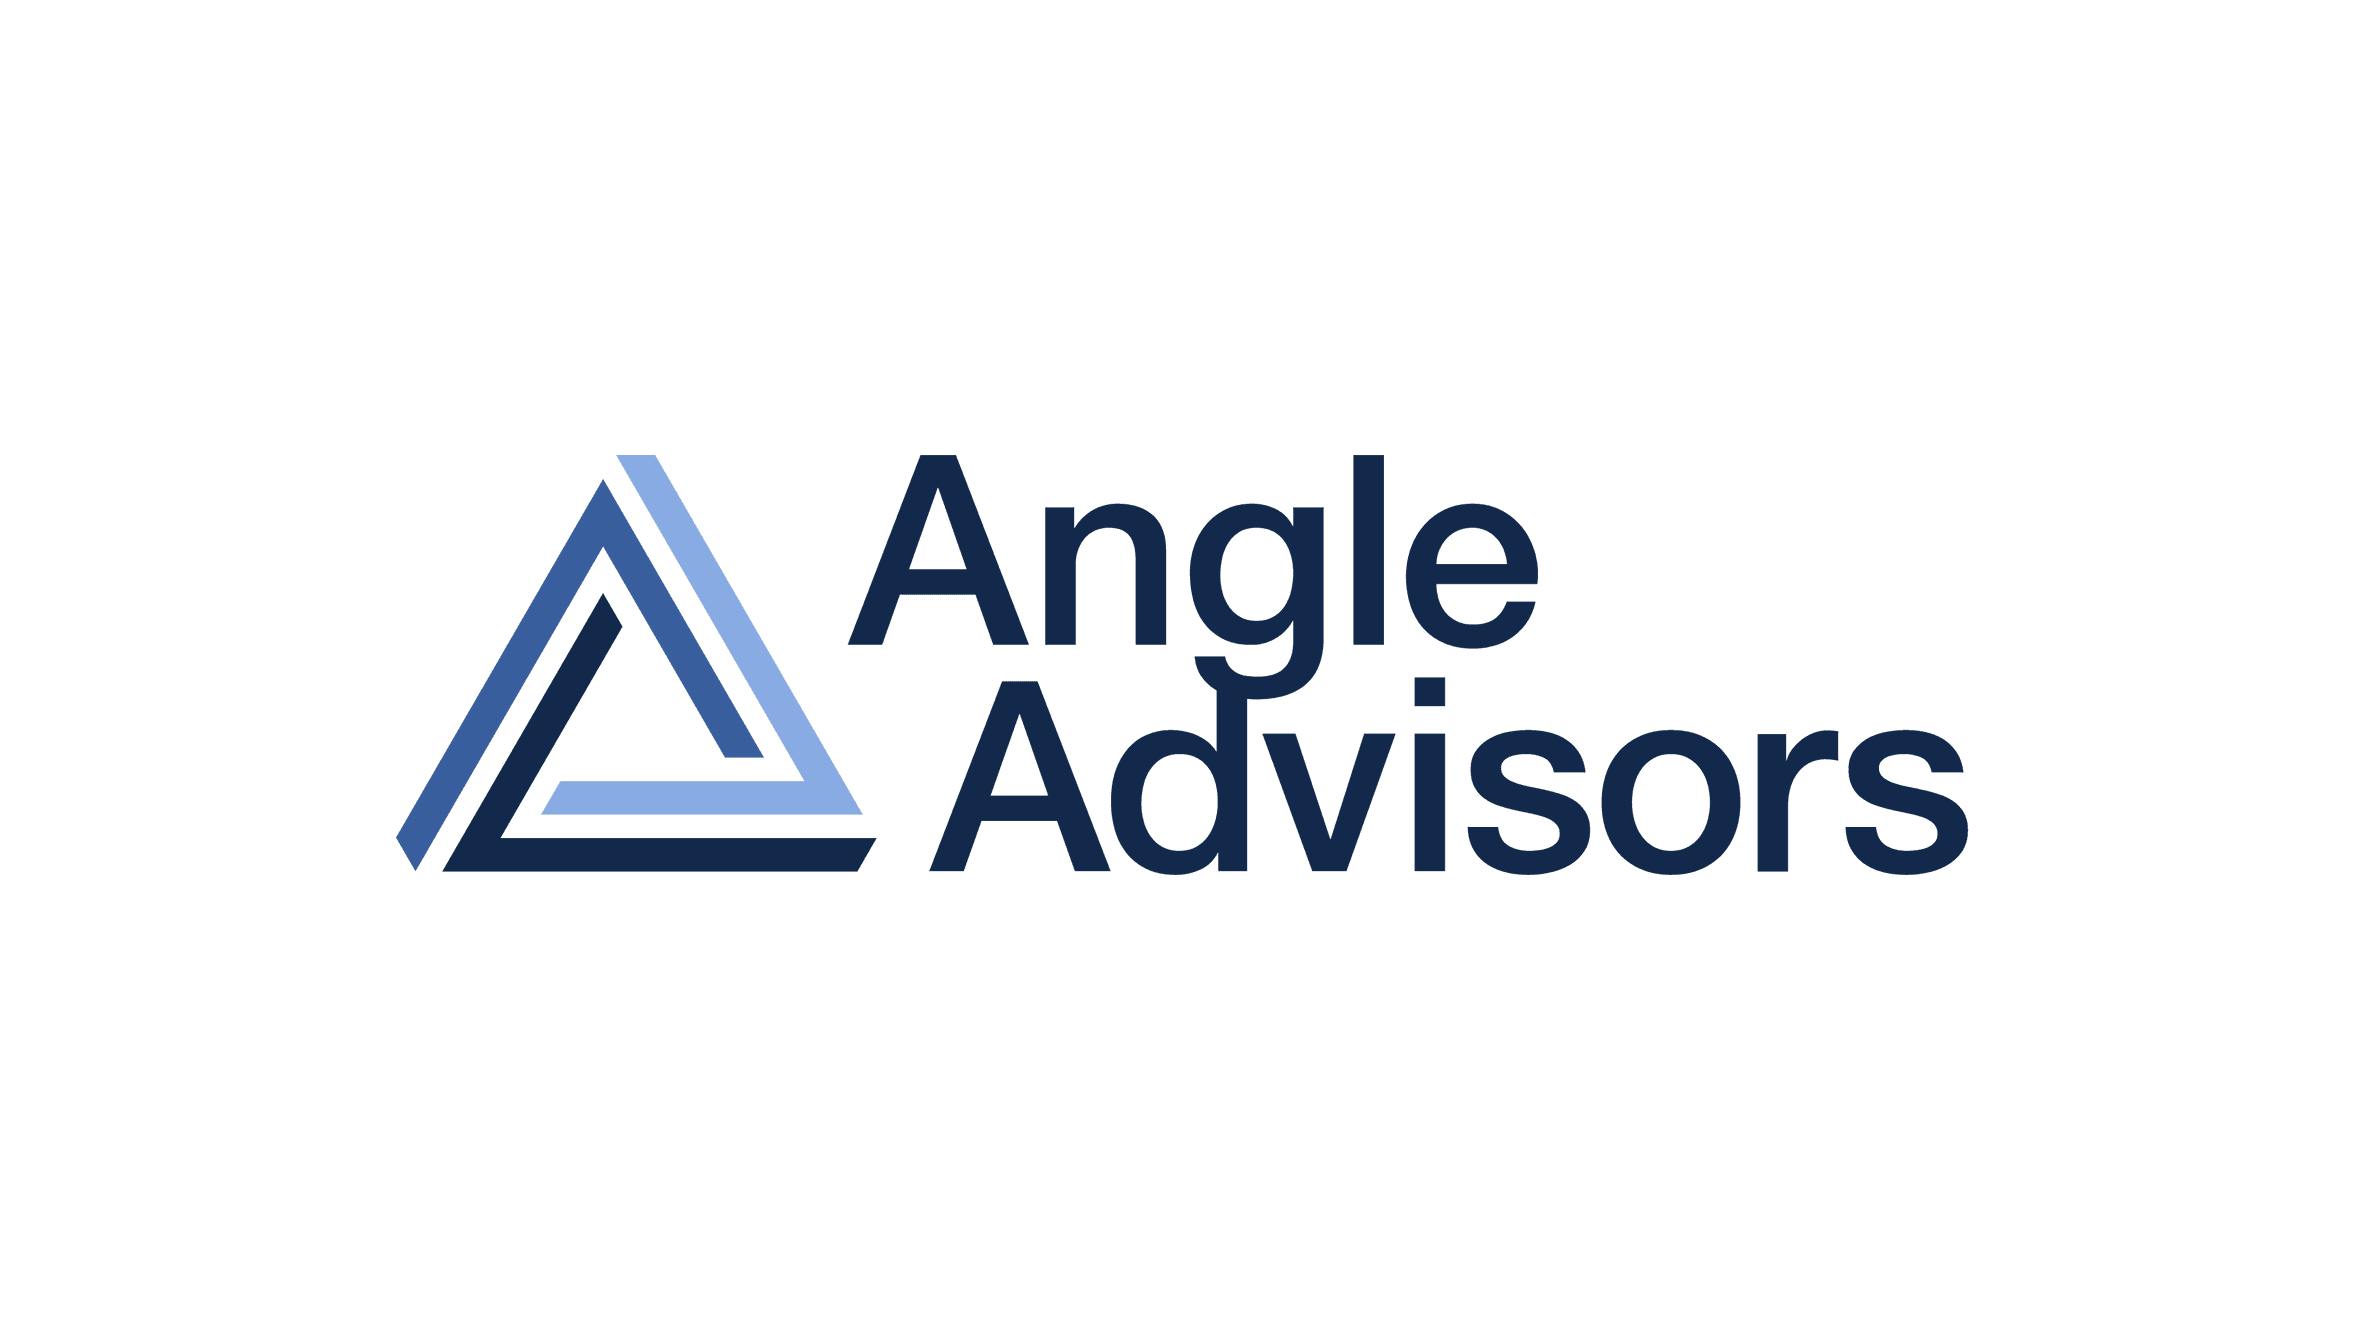 Product Angle Advisors' experience includes processes across industries image